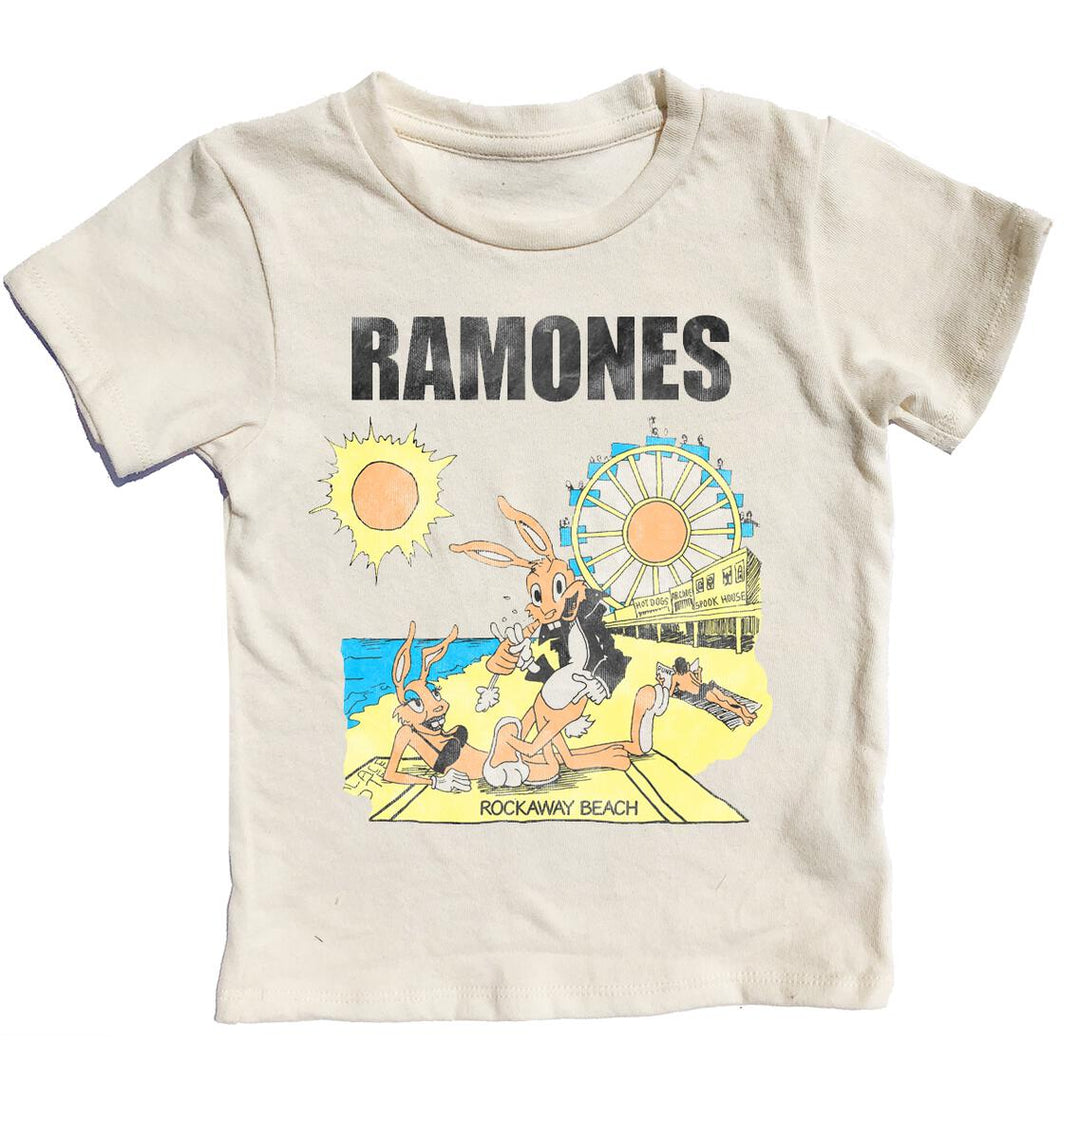 Ramones Organic Tee by Rowdy Sprout